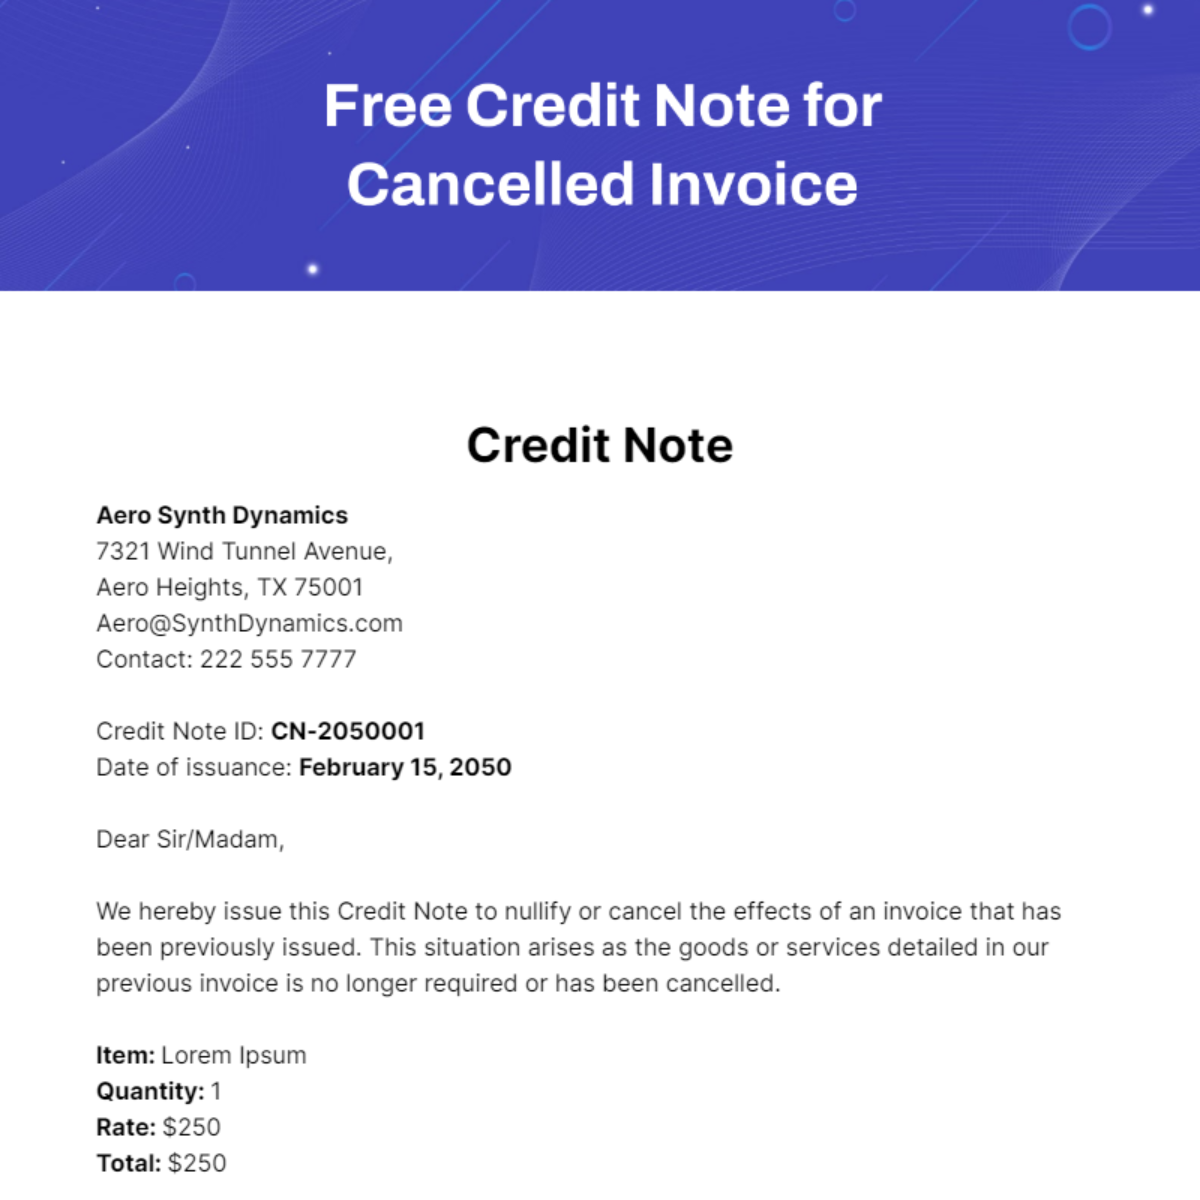 Credit Note for Cancelled Invoice Template